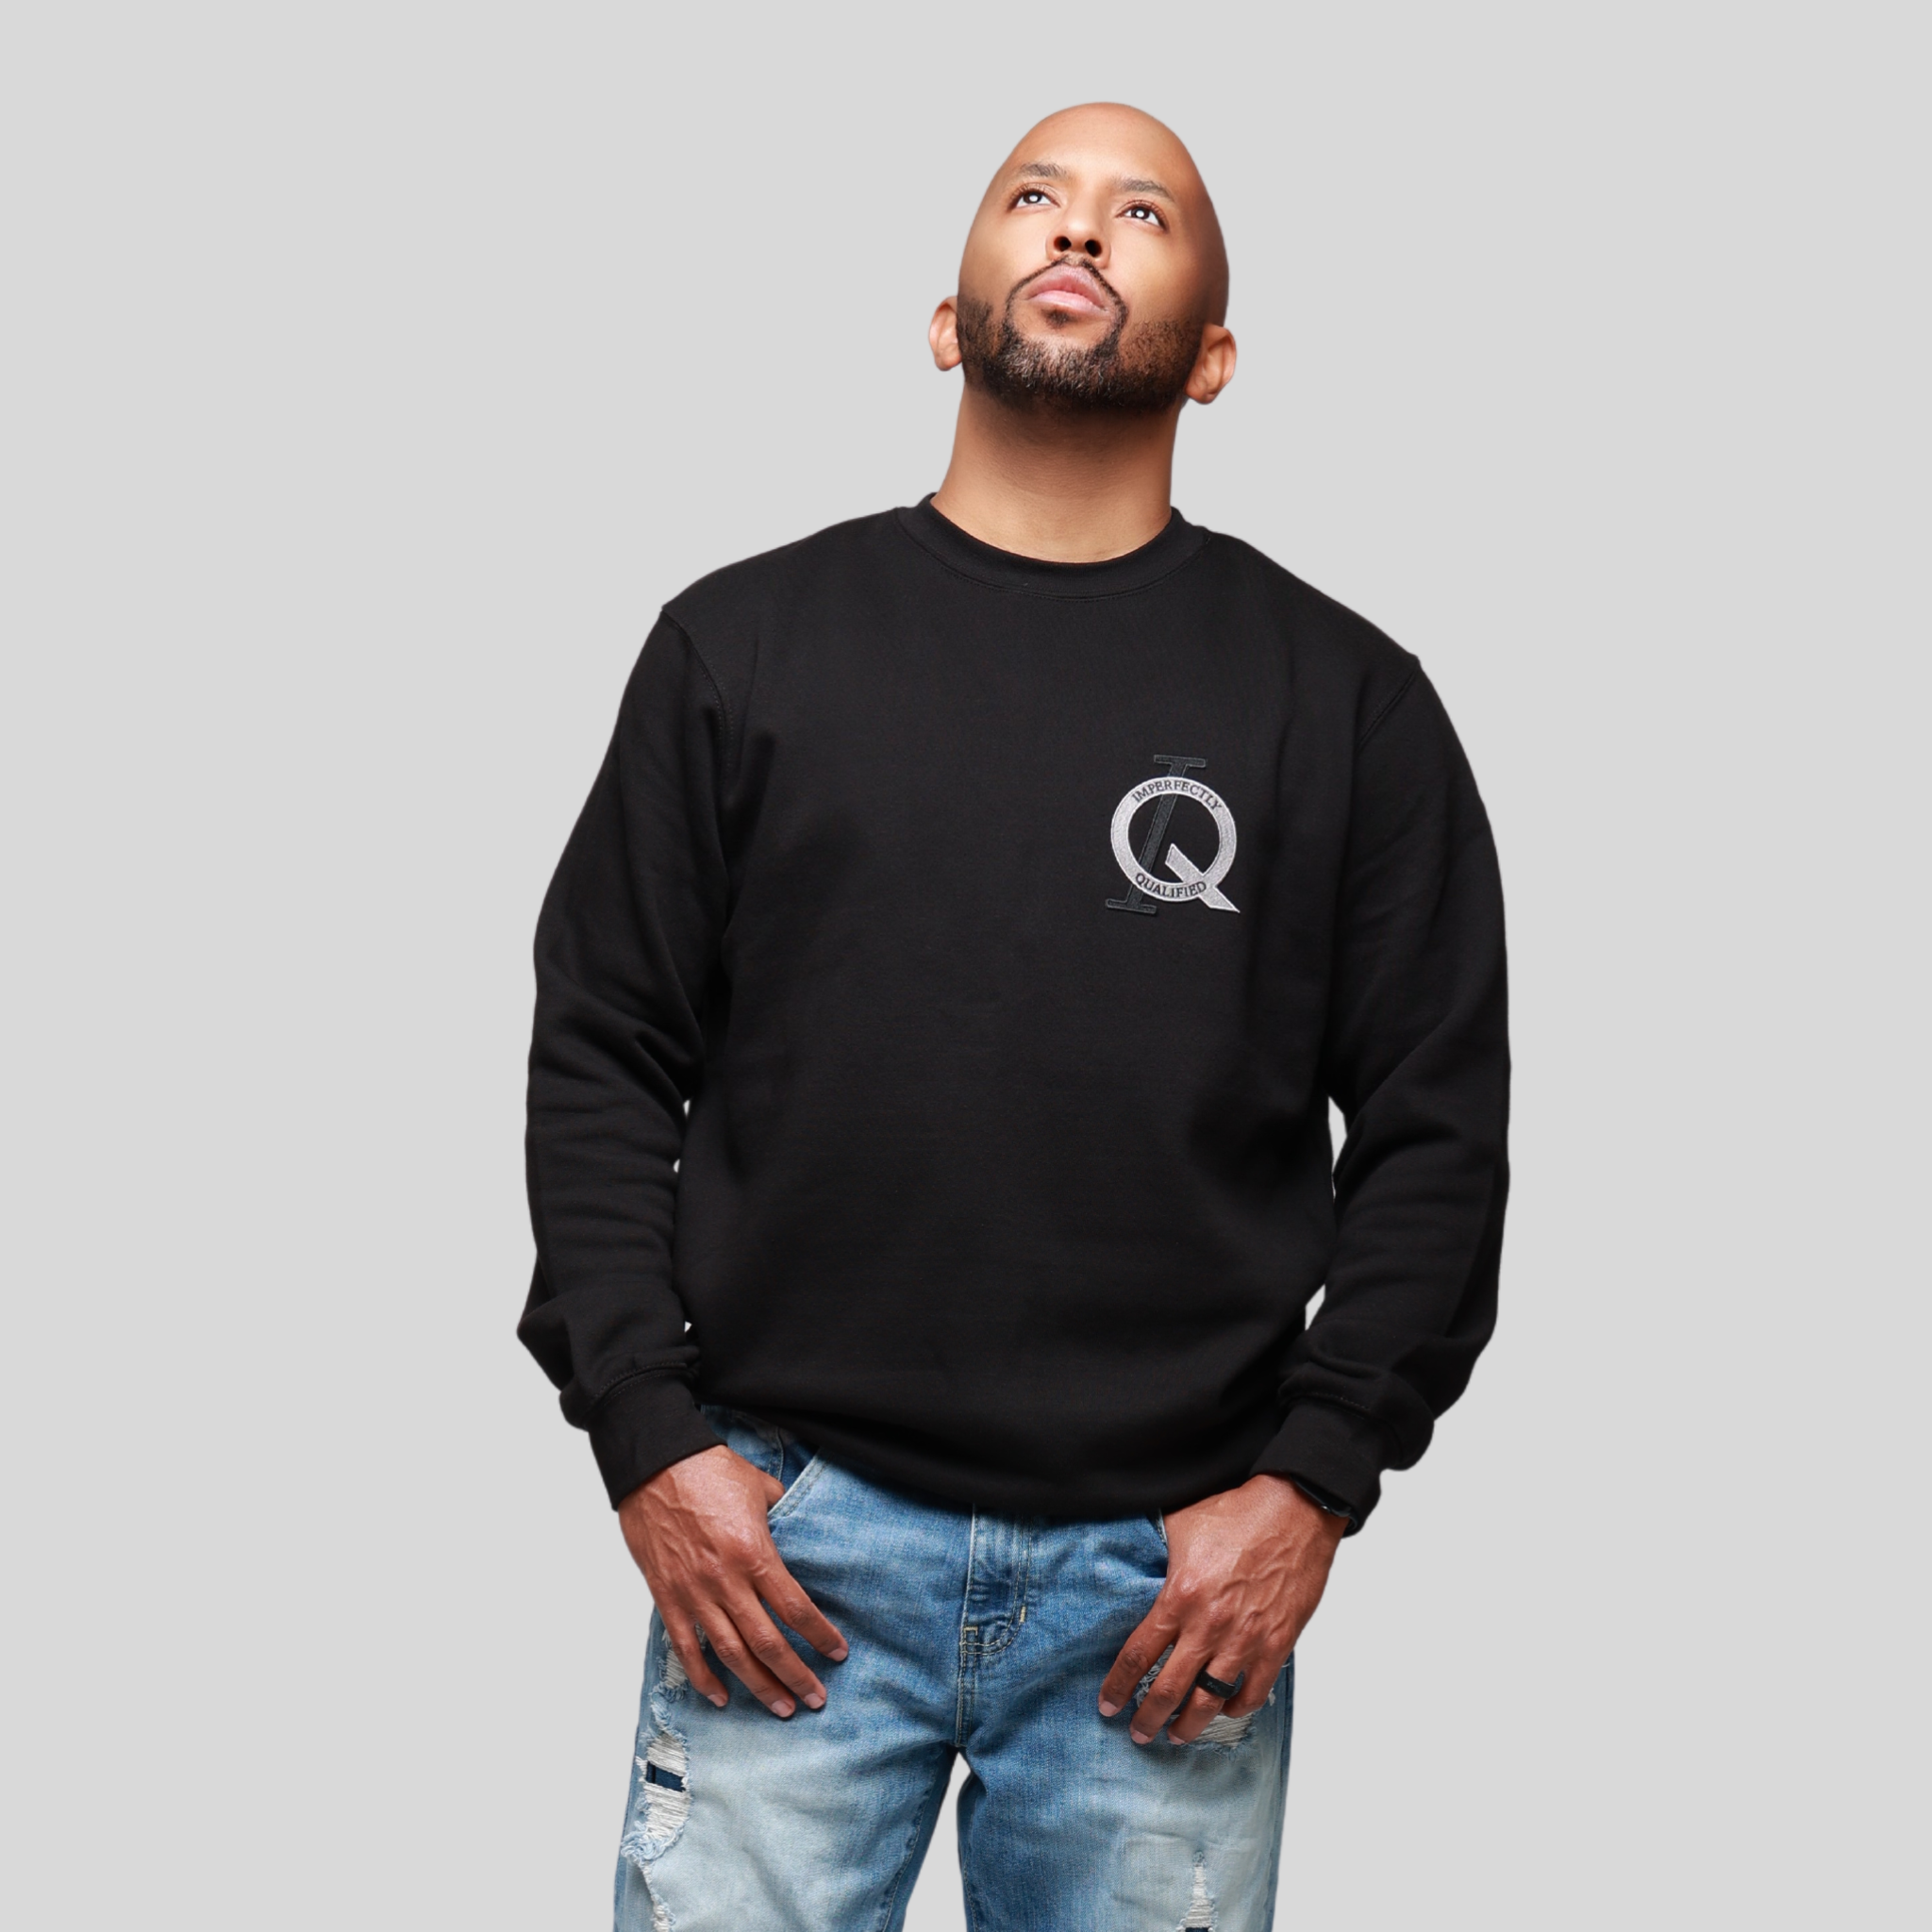 Imperfectly Qualified Embroidered Crewneck Sweatshirt